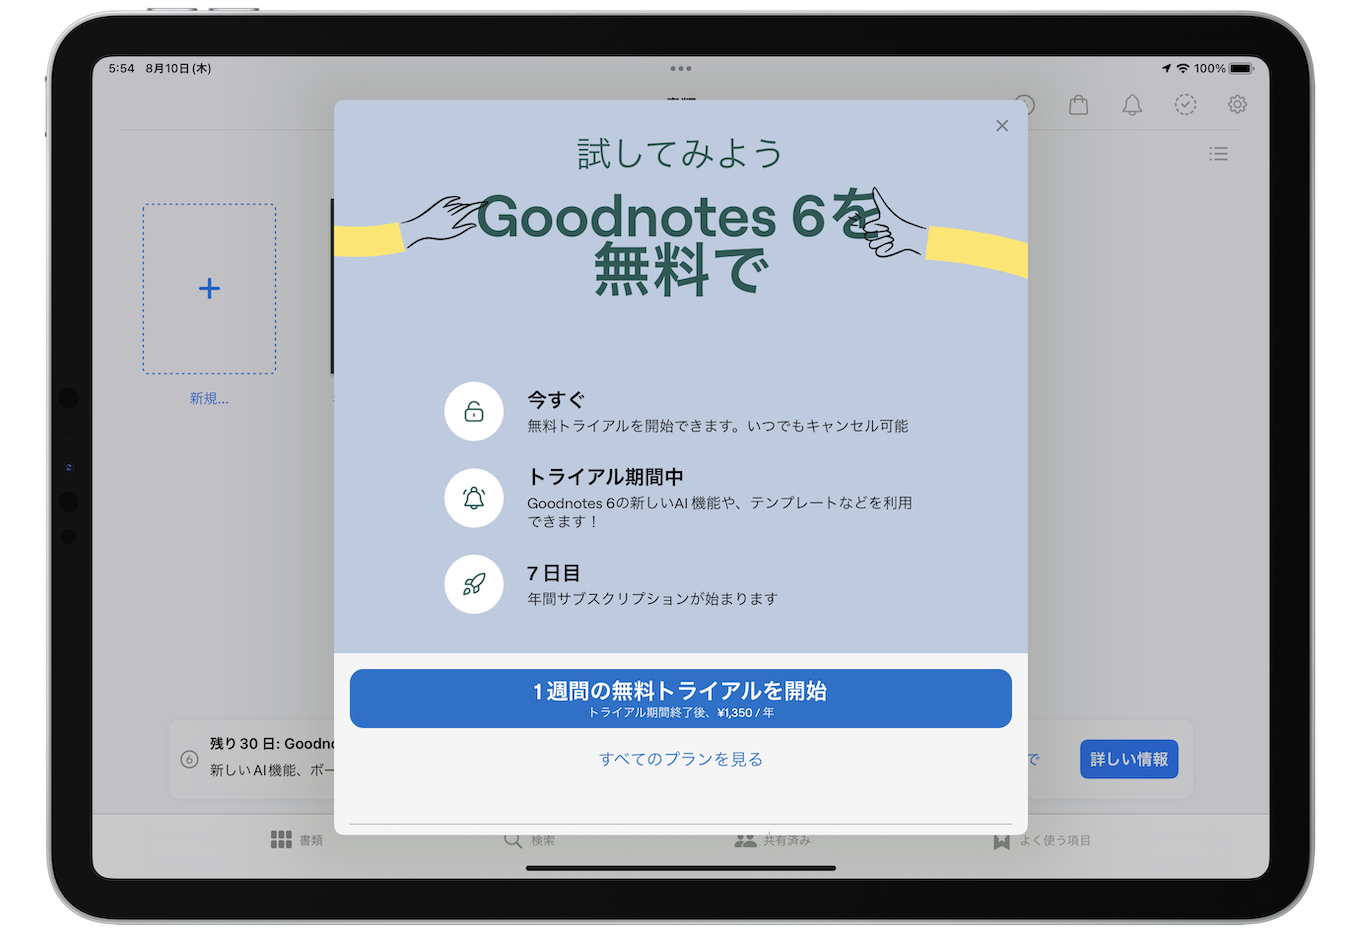 Goodnotes 6 free trial